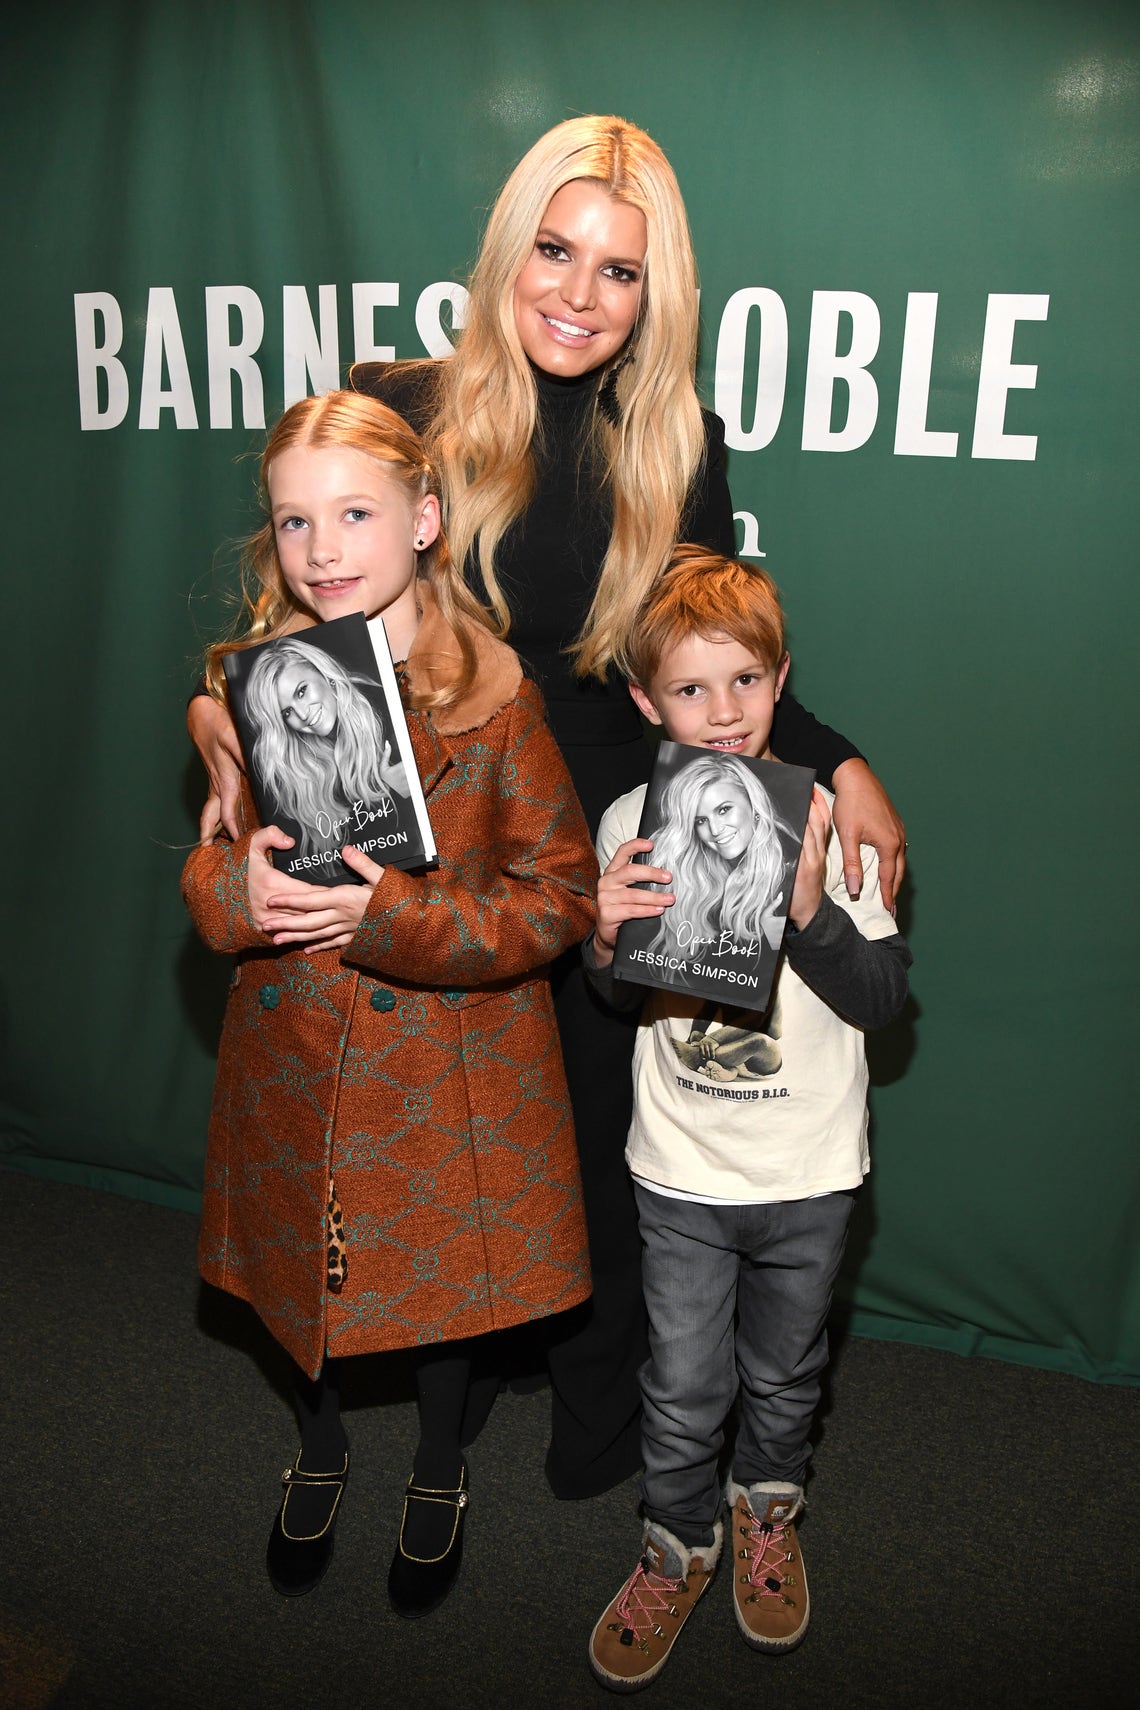 Jessica Simpson's Husband and Kids Show Up to Show Support at Her